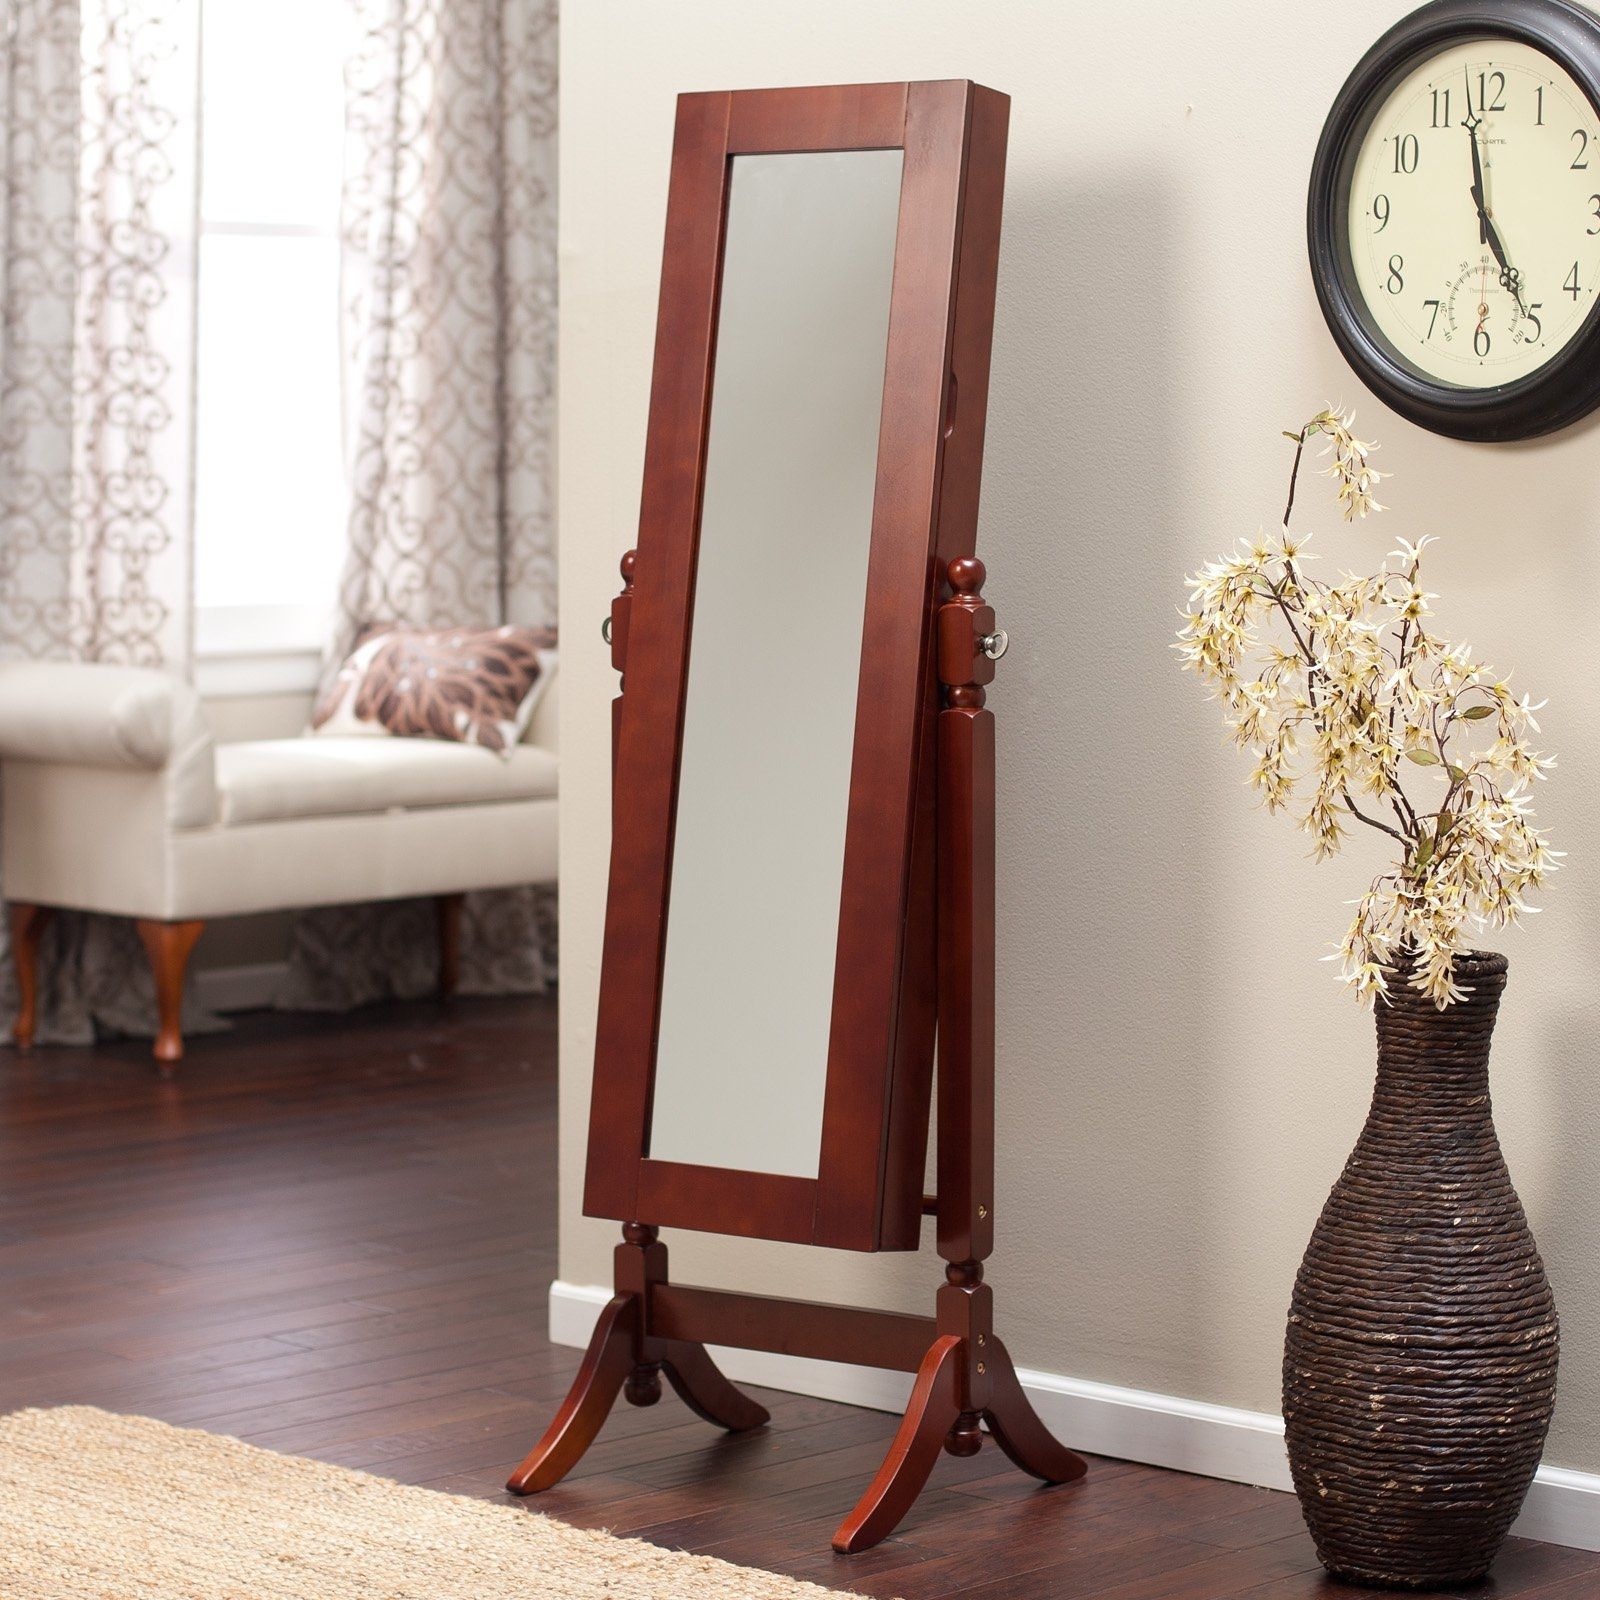 Bedroom Mirror Easel Diy Floor Mirror Stand Plans Full Body Pertaining To Wrought Iron Full Length Mirror (View 2 of 15)